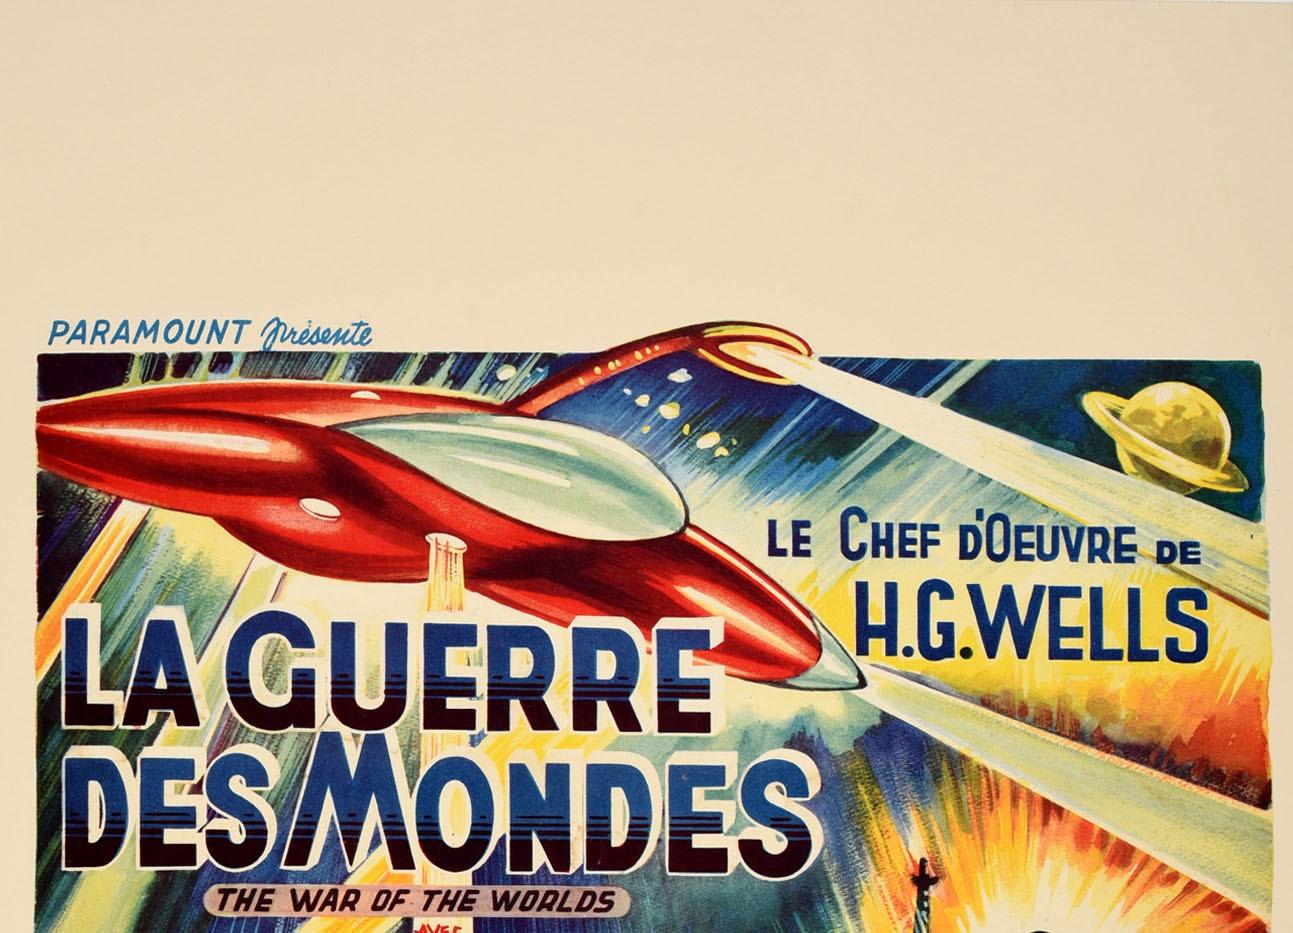 Original Vintage Film Poster The War Of The Worlds H. G. Wells Belgian Release - Print by Unknown